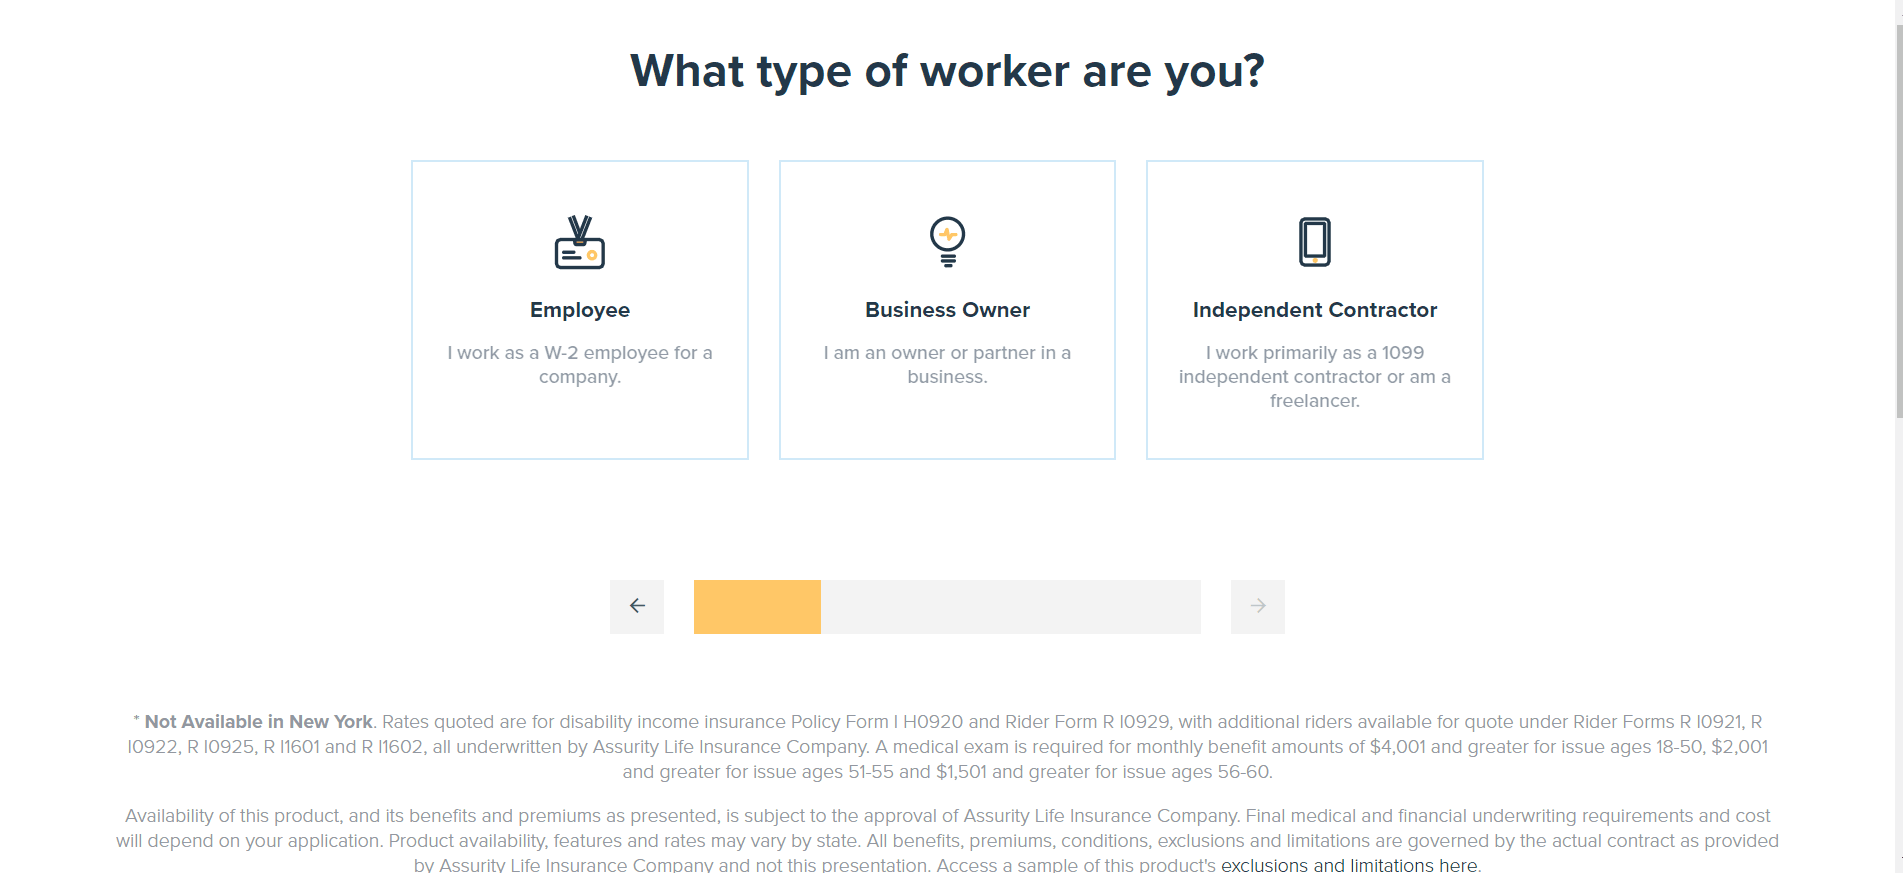 Breeze Review: My Experience Using Breeze - What type of worker are you?